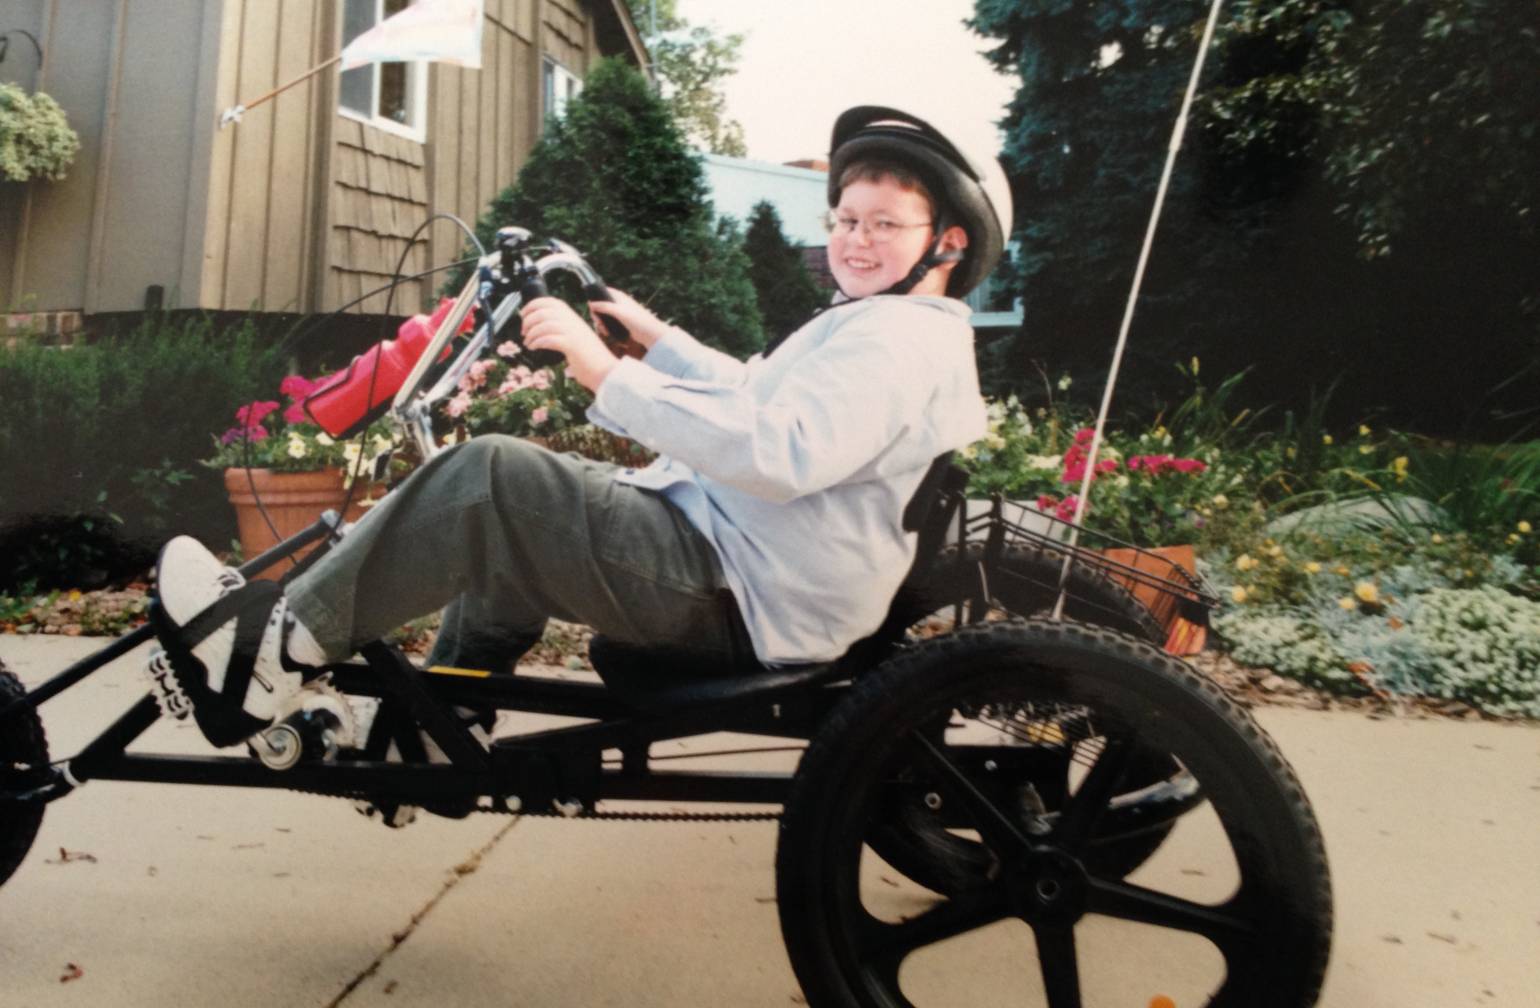 Robert Favorite as a young child on a bike